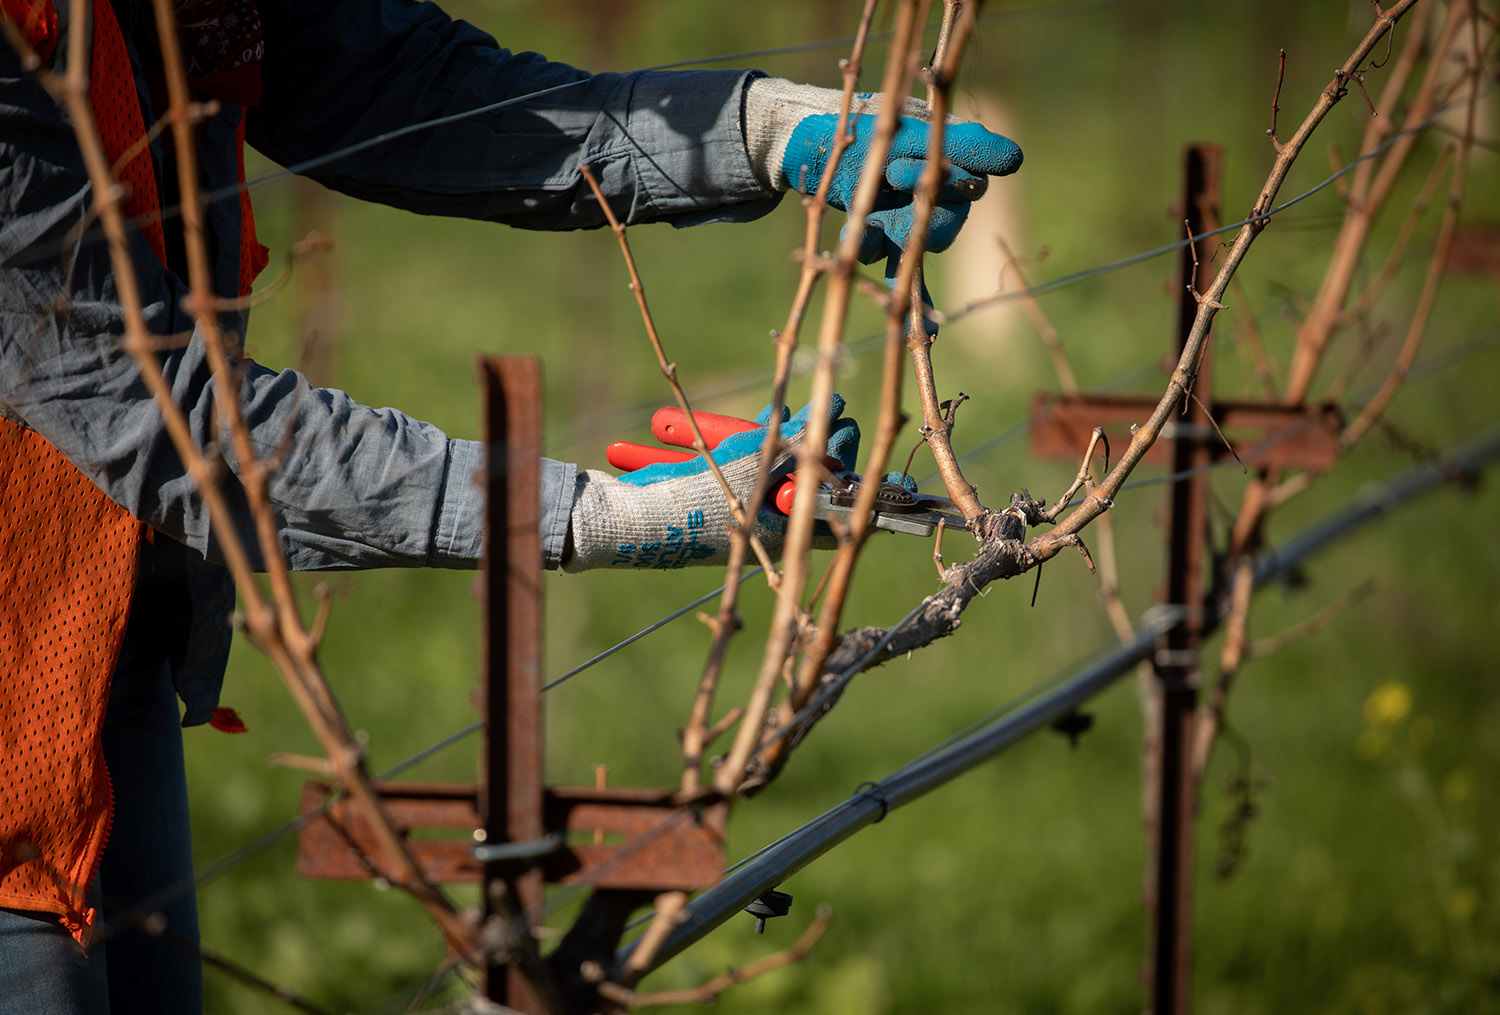 Pruning the vines during winter time at Eco Terreno wine farm